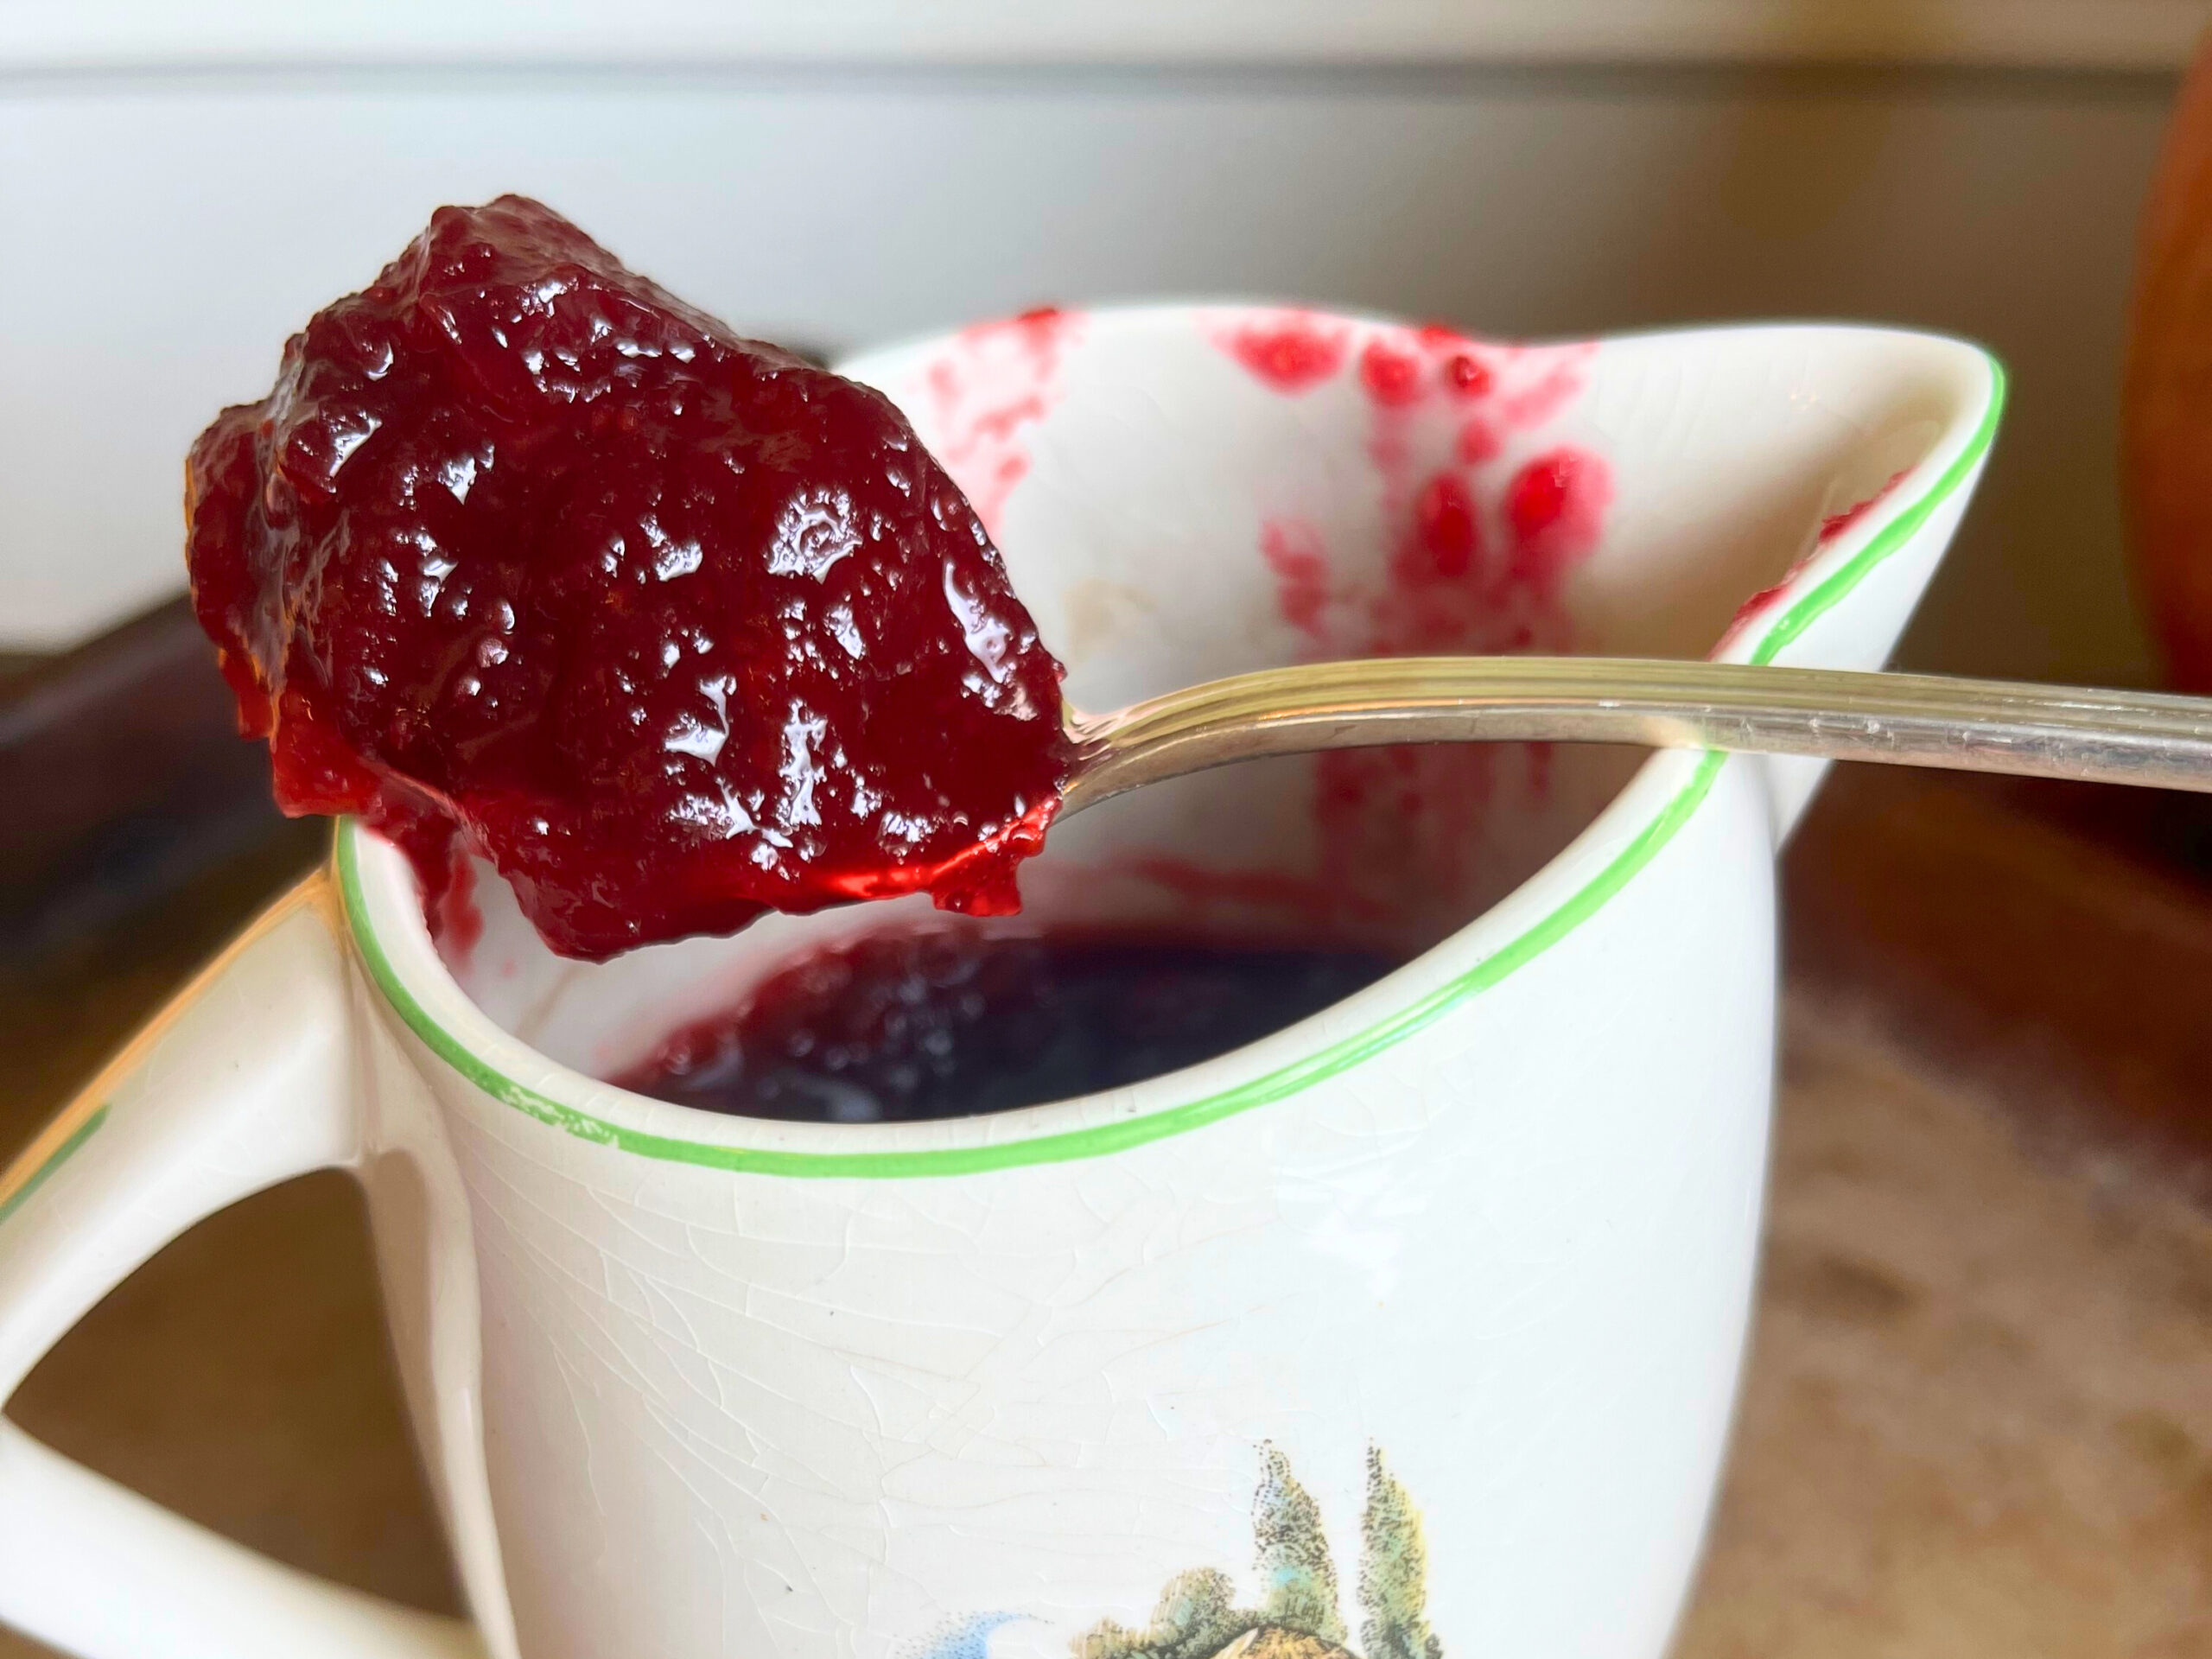 A small with and green pitcher with cranberry sauce in it. A spoon resting on tip with a scoop of cranberry sauce.